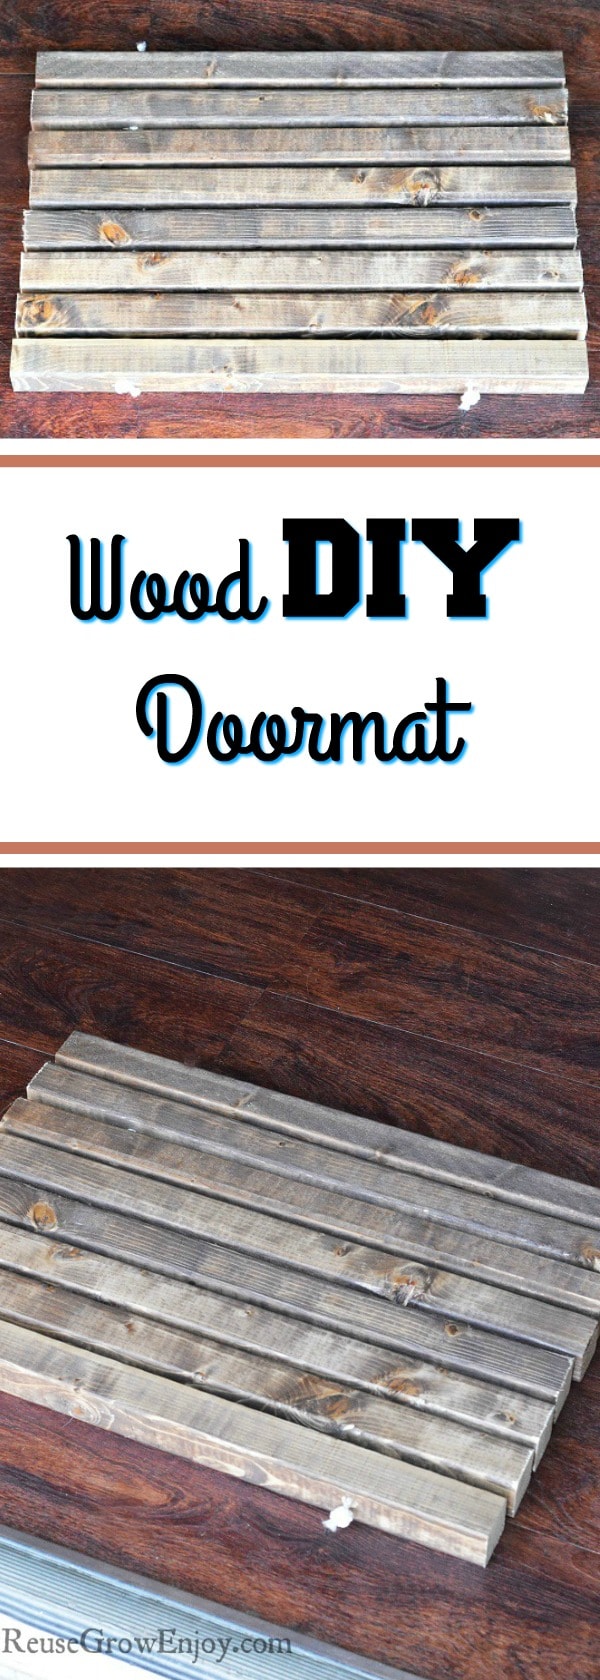 Need a new doormat? This is a nice easy DIY you can do. It is a wood DIY doormat.